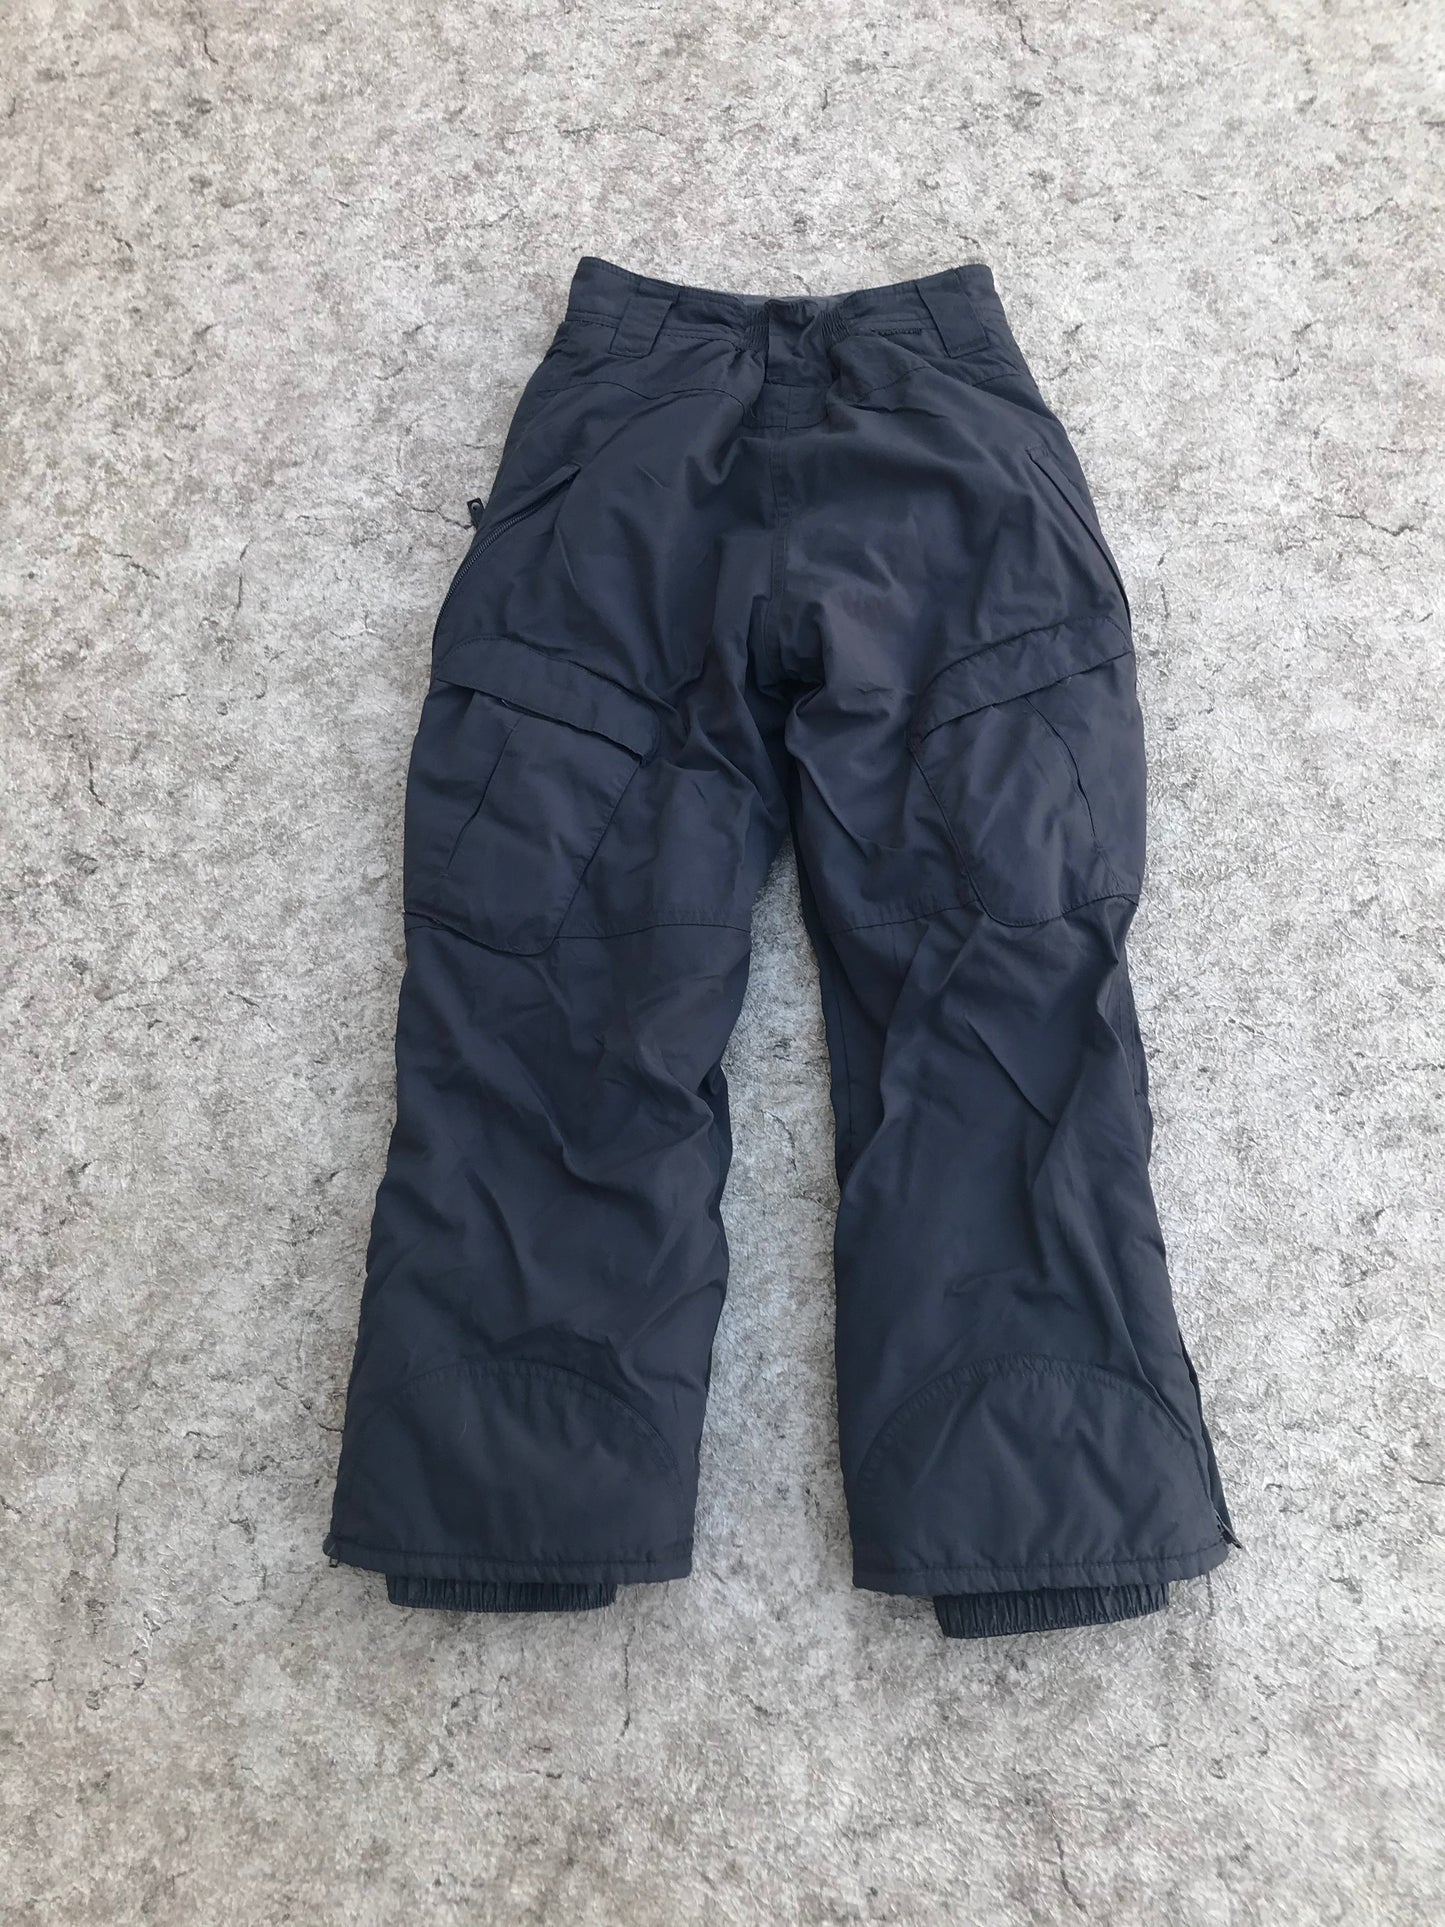 Snow Pants Child Size 10 Ripzone Lil Chick Smoke Grey Micro Fleece Lined Inside Excellent